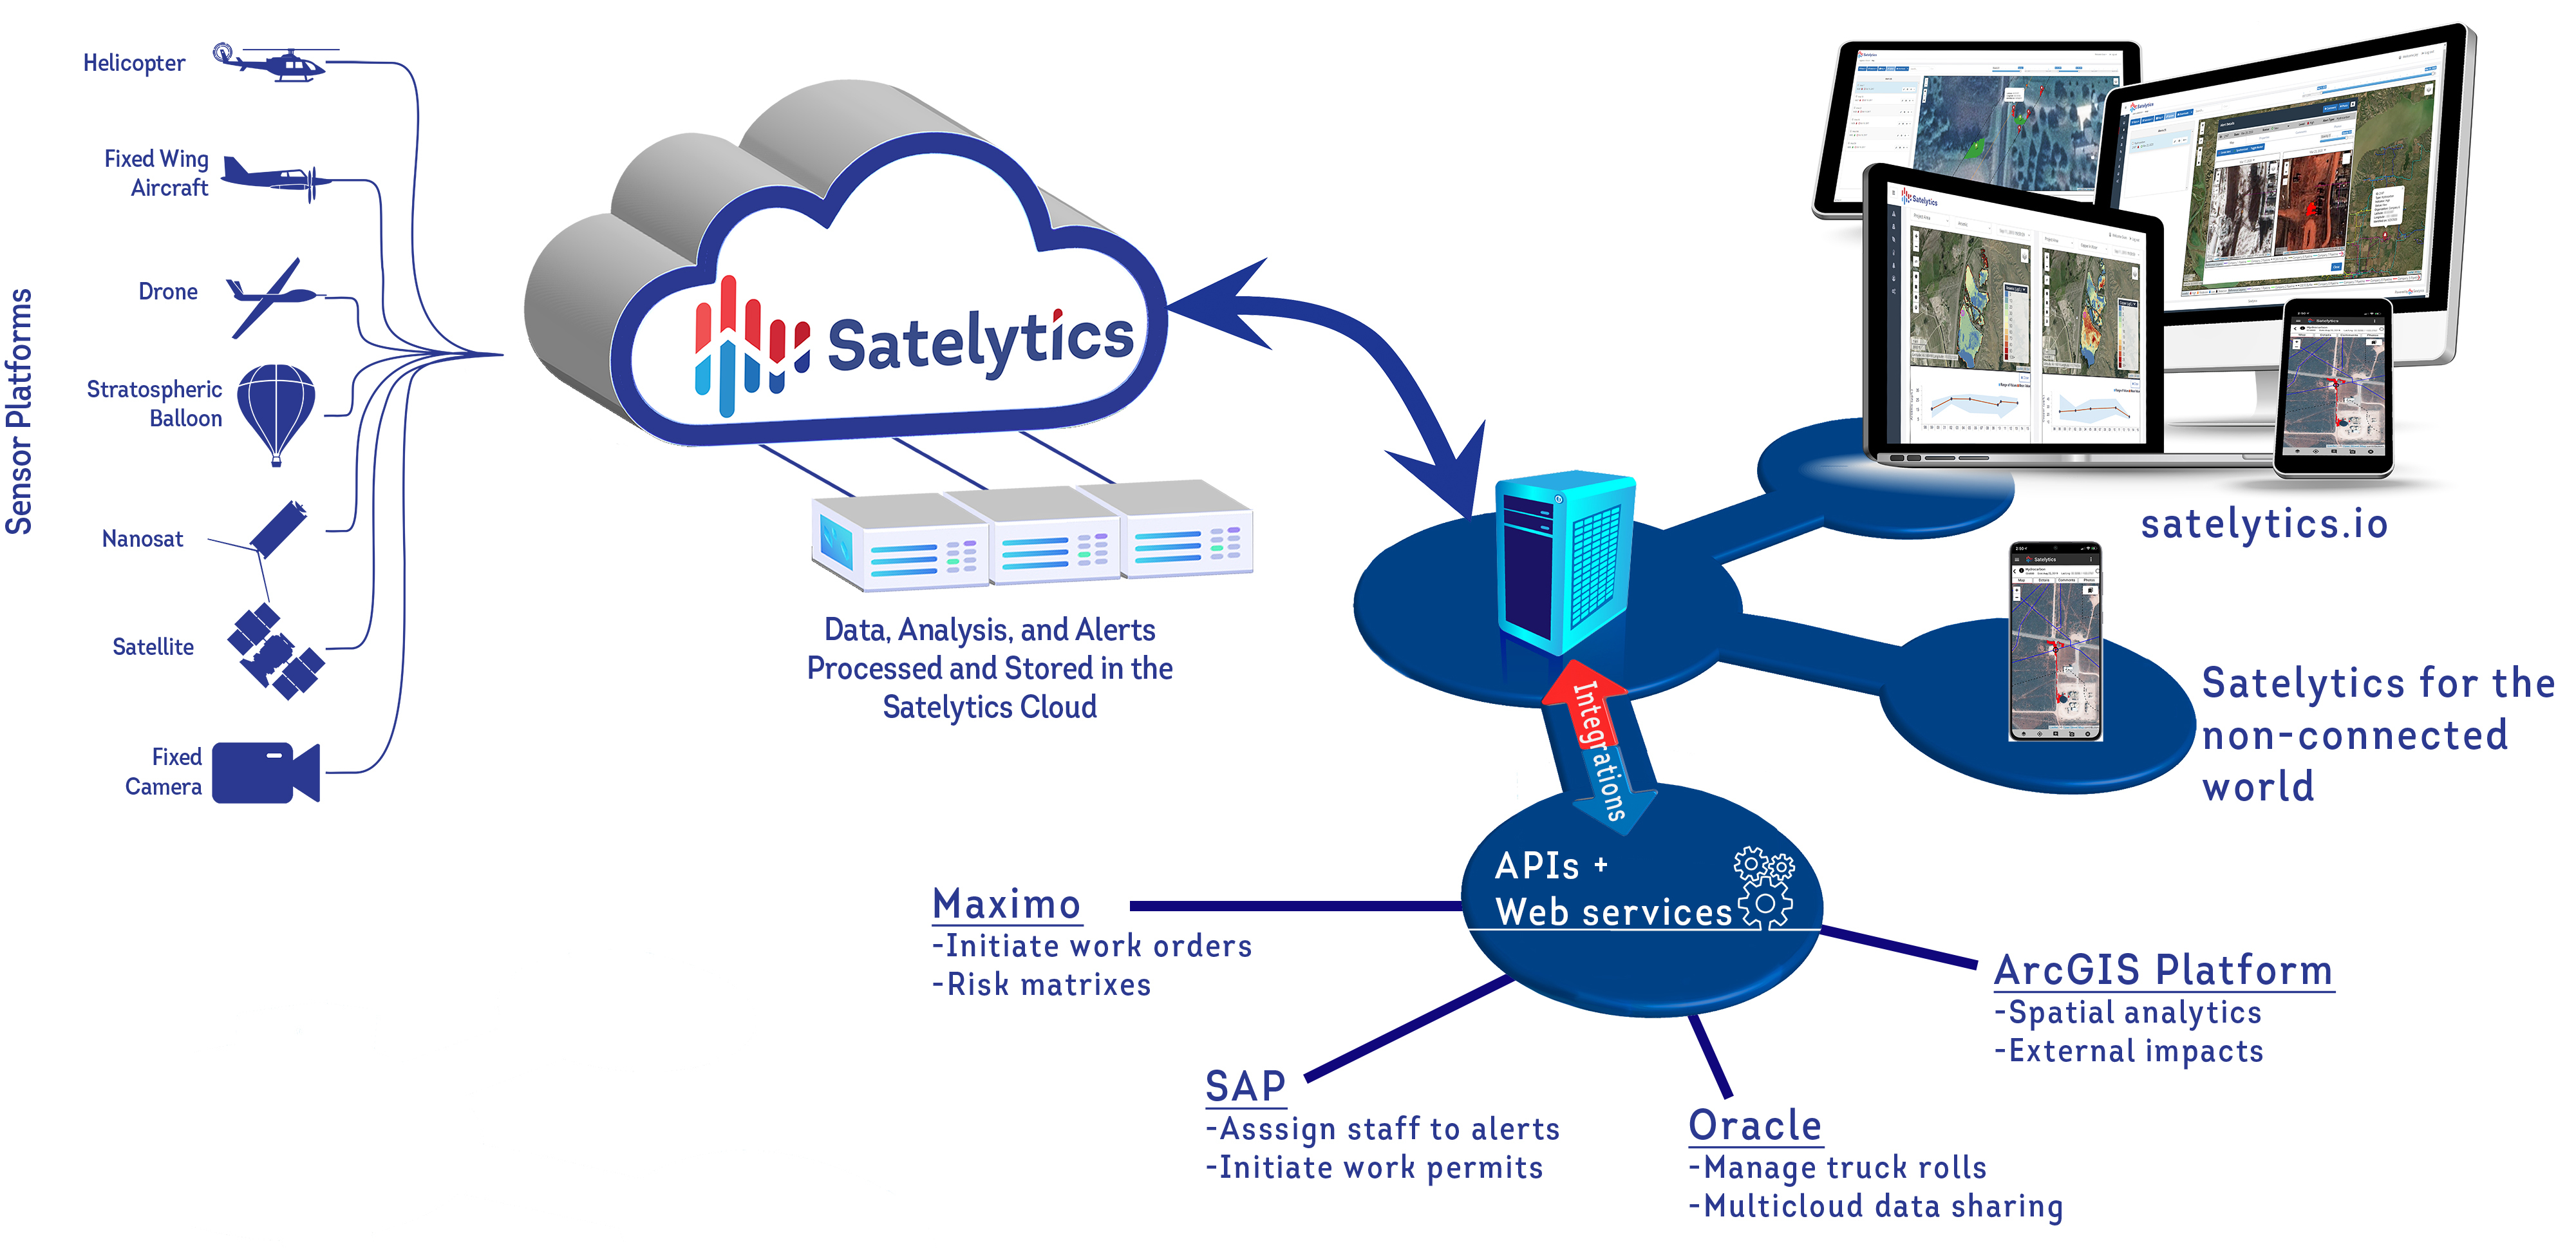 Satelytics' role in automating the initiation of work orders based on alerts.